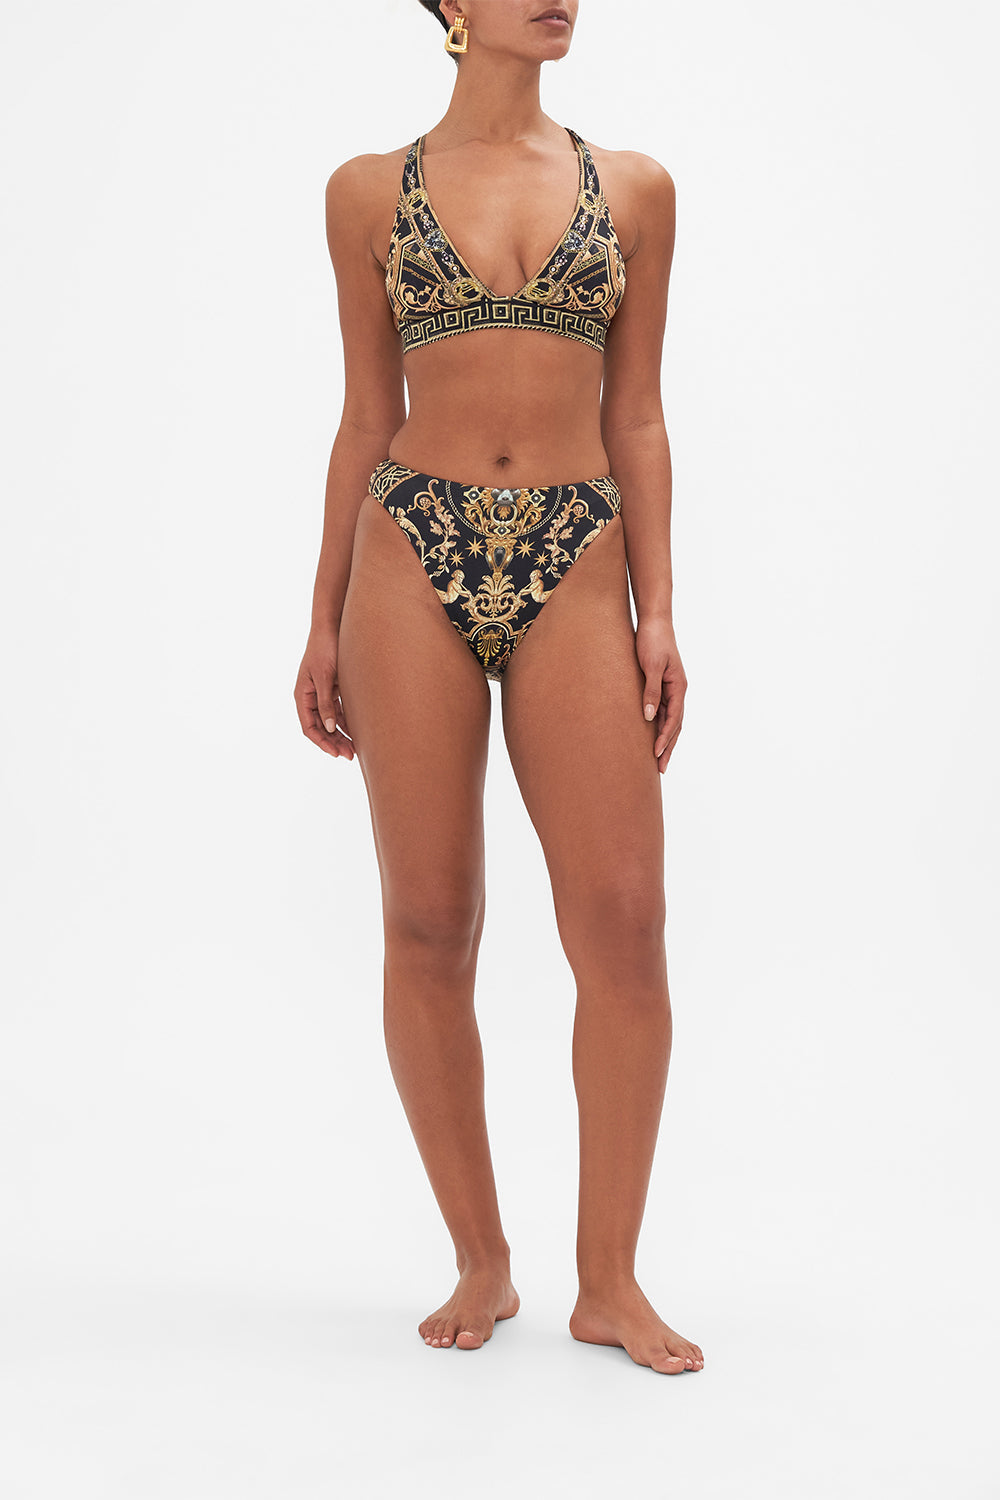 Front view of model wearing CAMILLA lingerie high waisted brief in Duomo Dynasty print